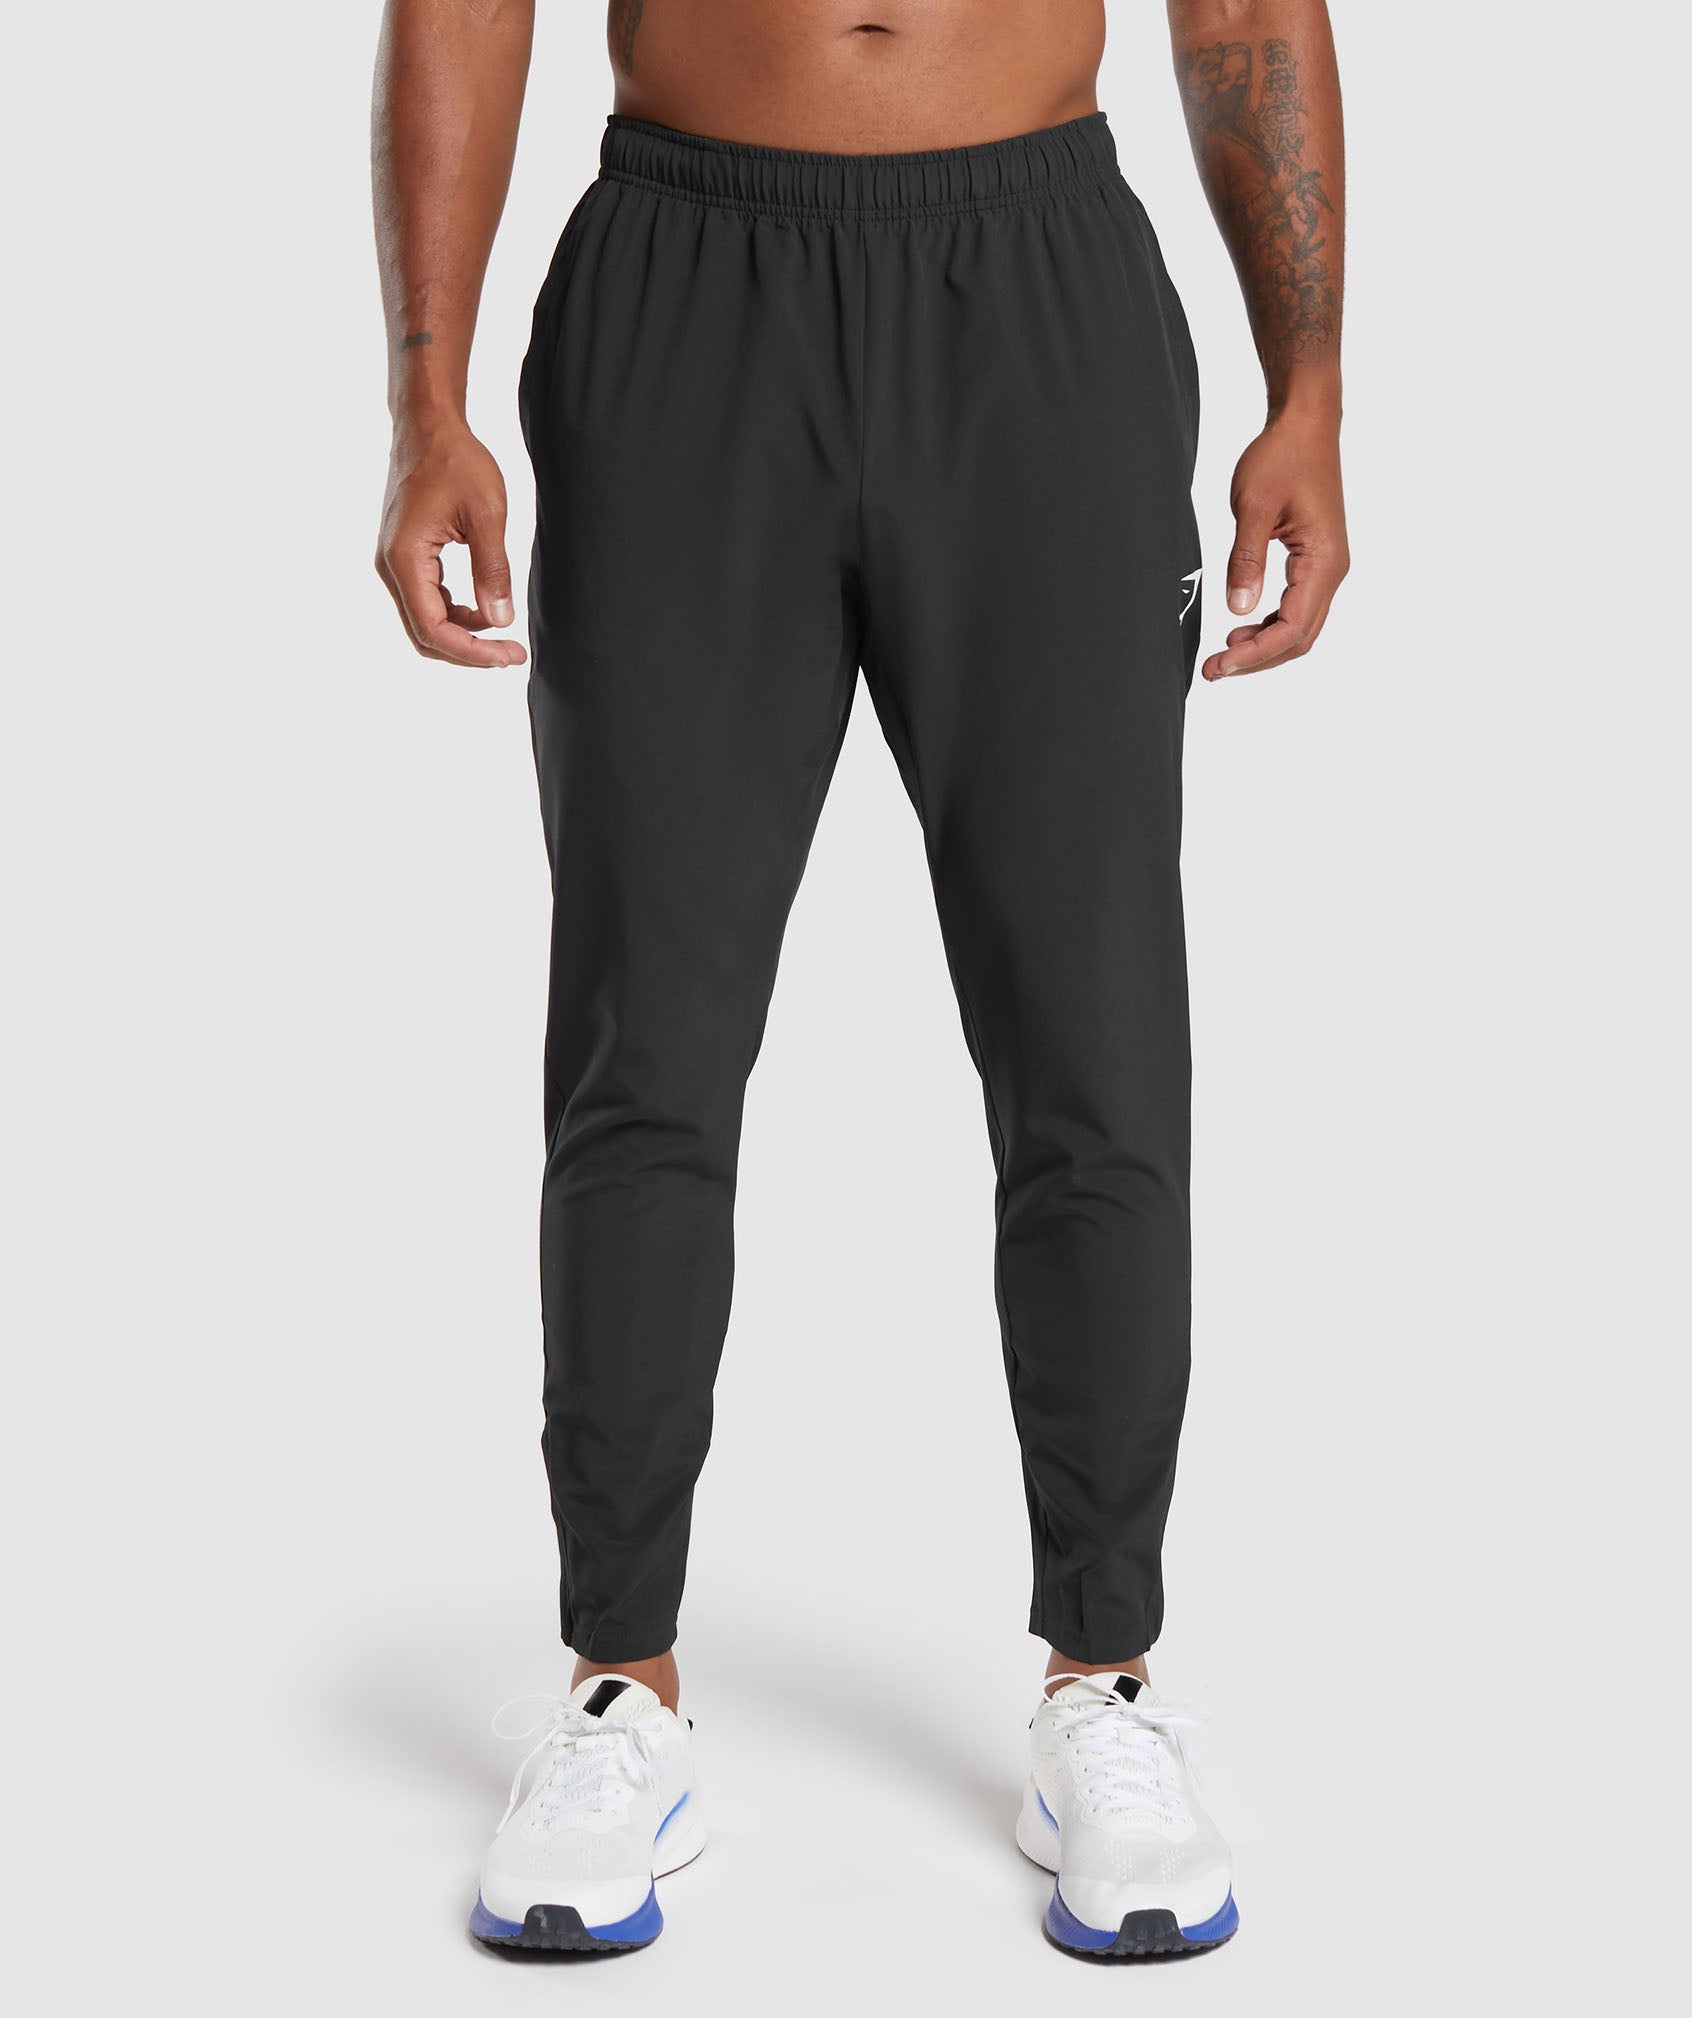 Arrival Joggers in Black